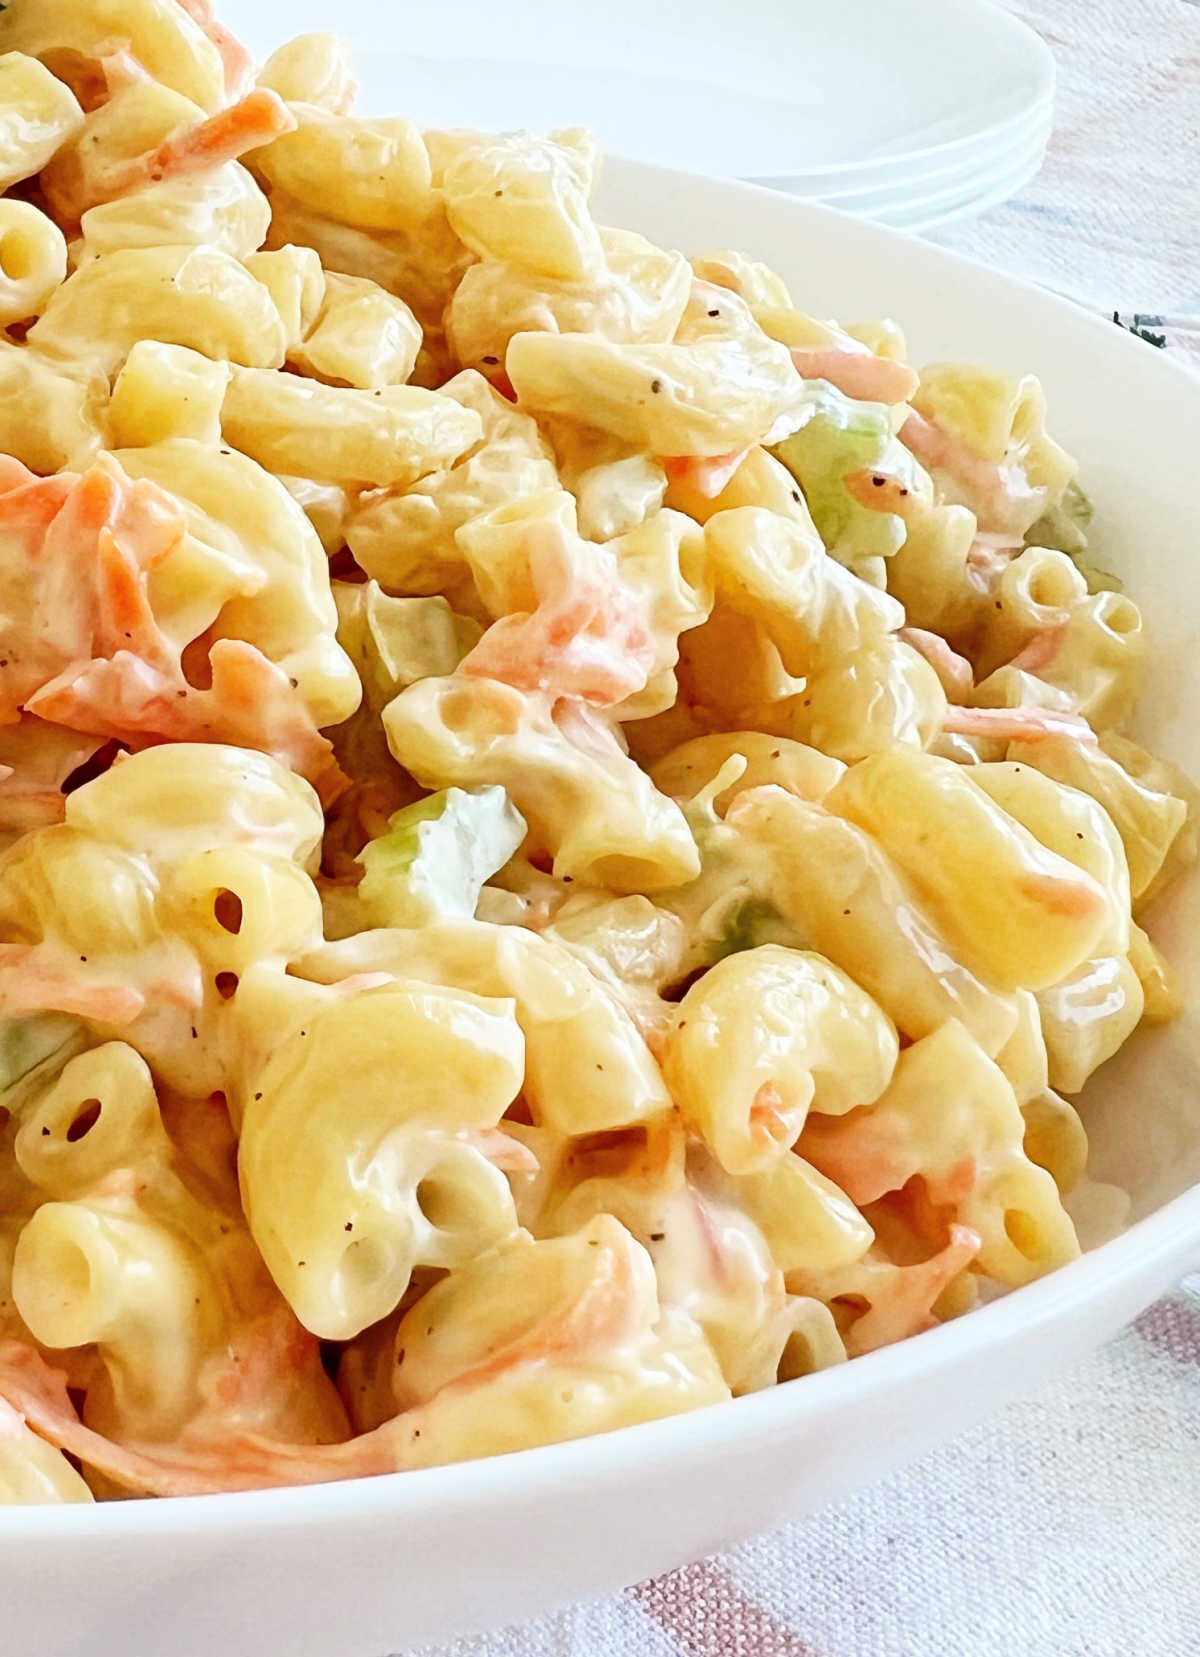 side view of Hawaiian macaroni salad with carrots and celery in bowl on the table.